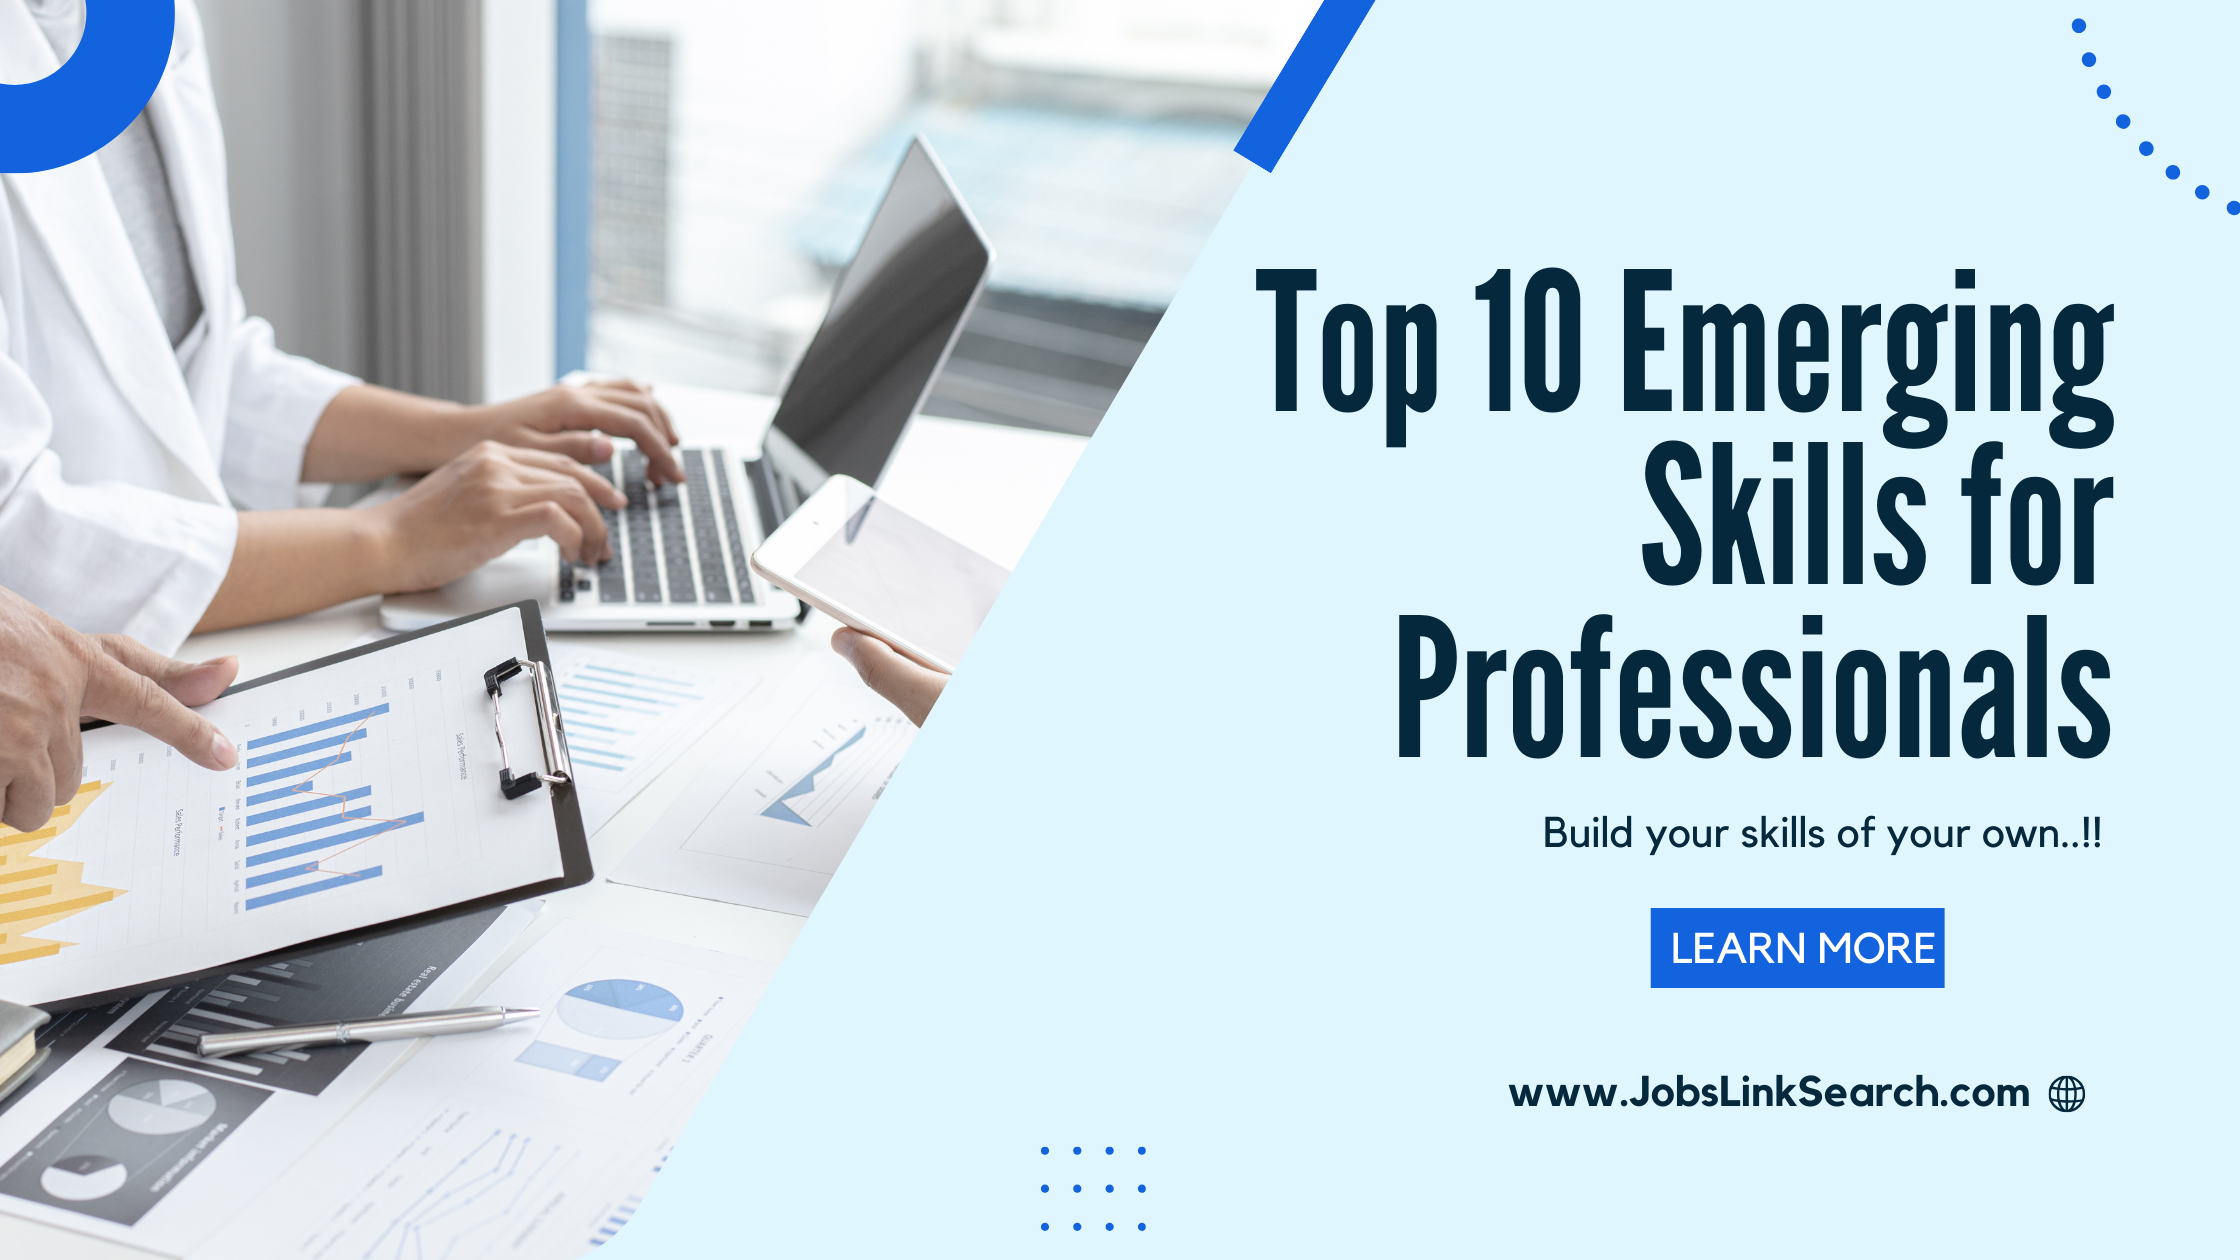 Top 10 Emerging Skills for Professionals